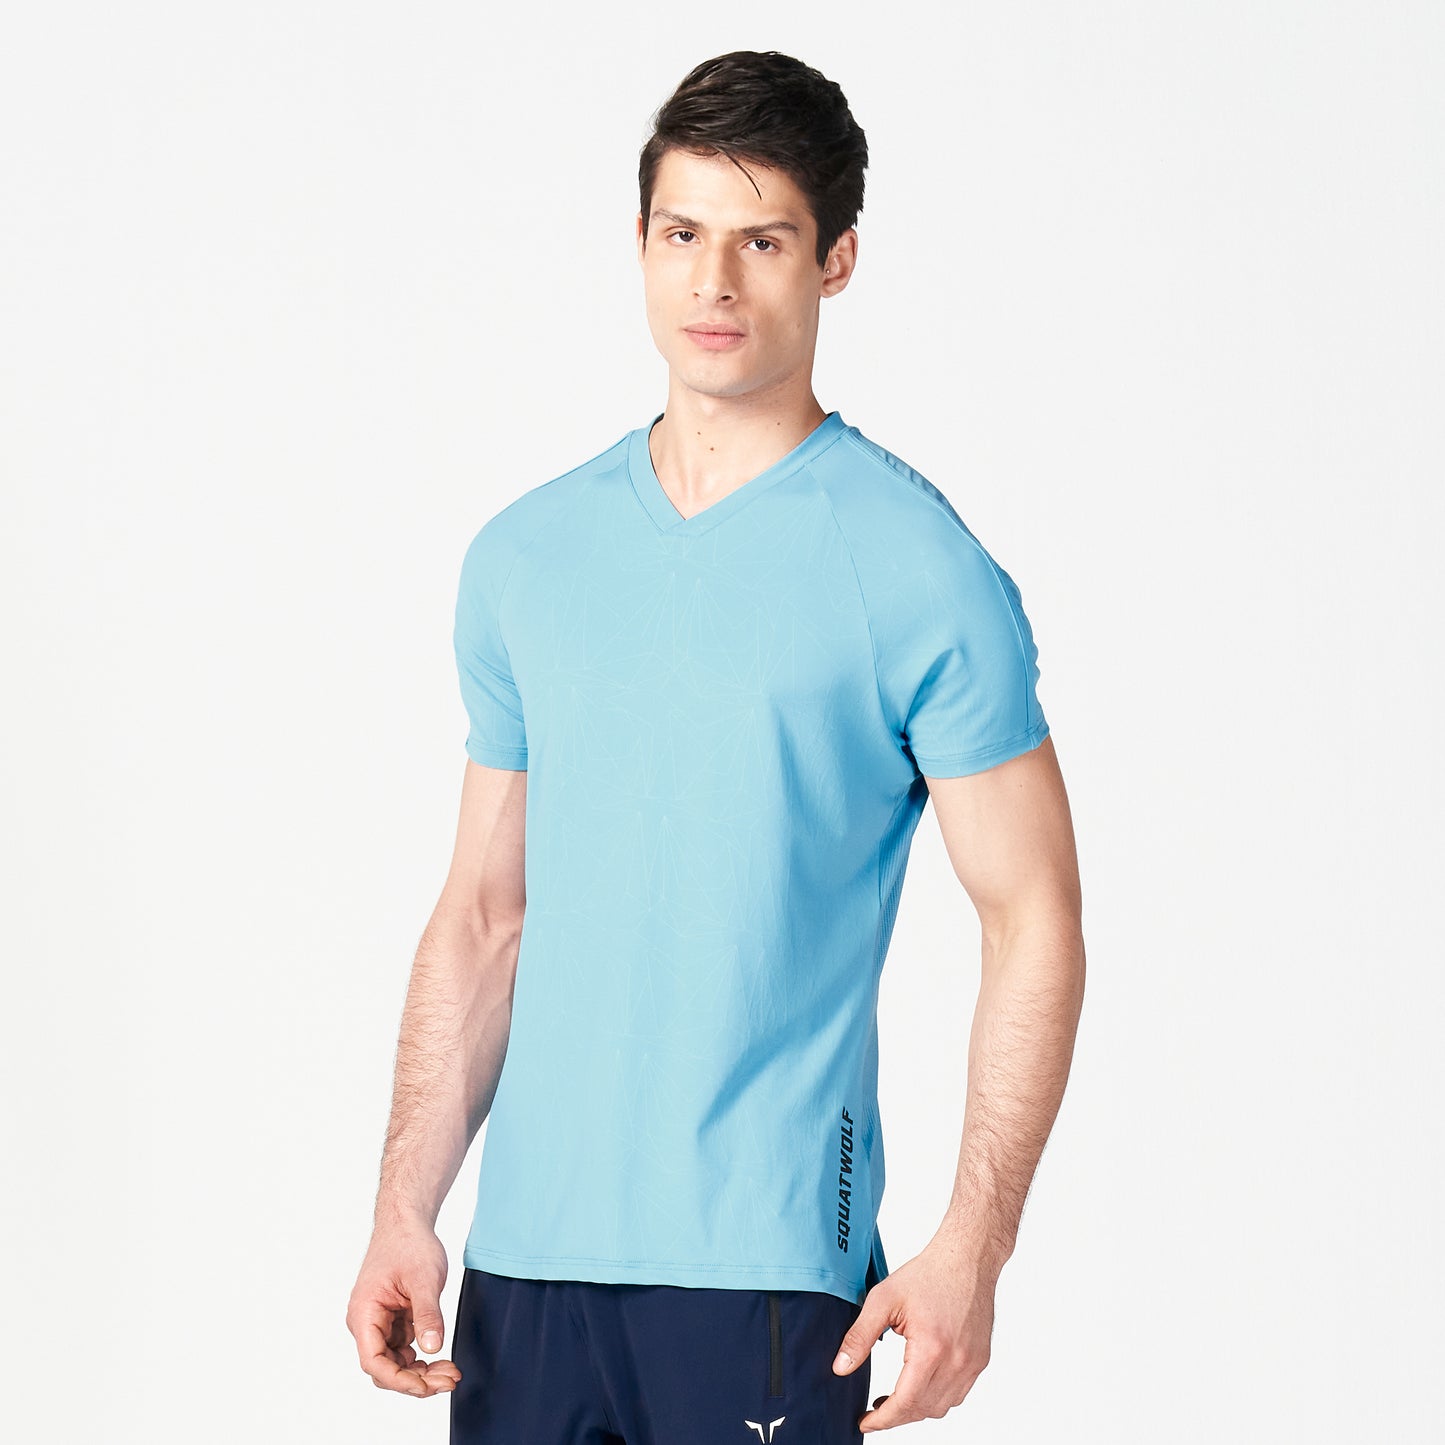 squatwolf-gym-wear-core-v-neck-aerotech-tee-blue-workout-shirts-for-men